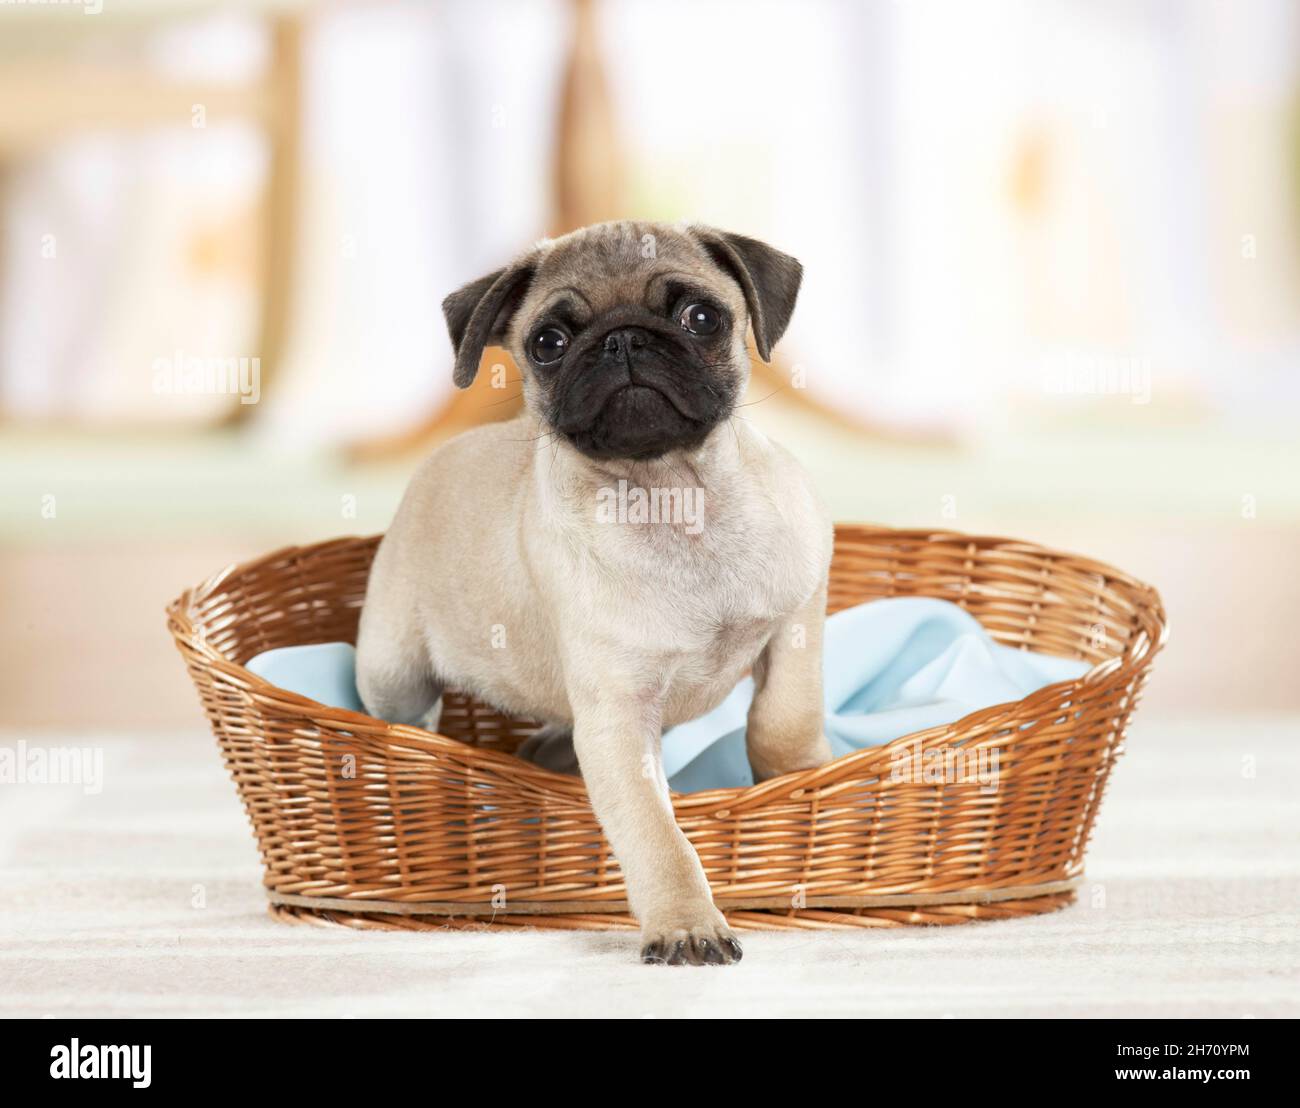 Pug. Puppy leaving its bed in a wicker basket. Germany Stock Photo